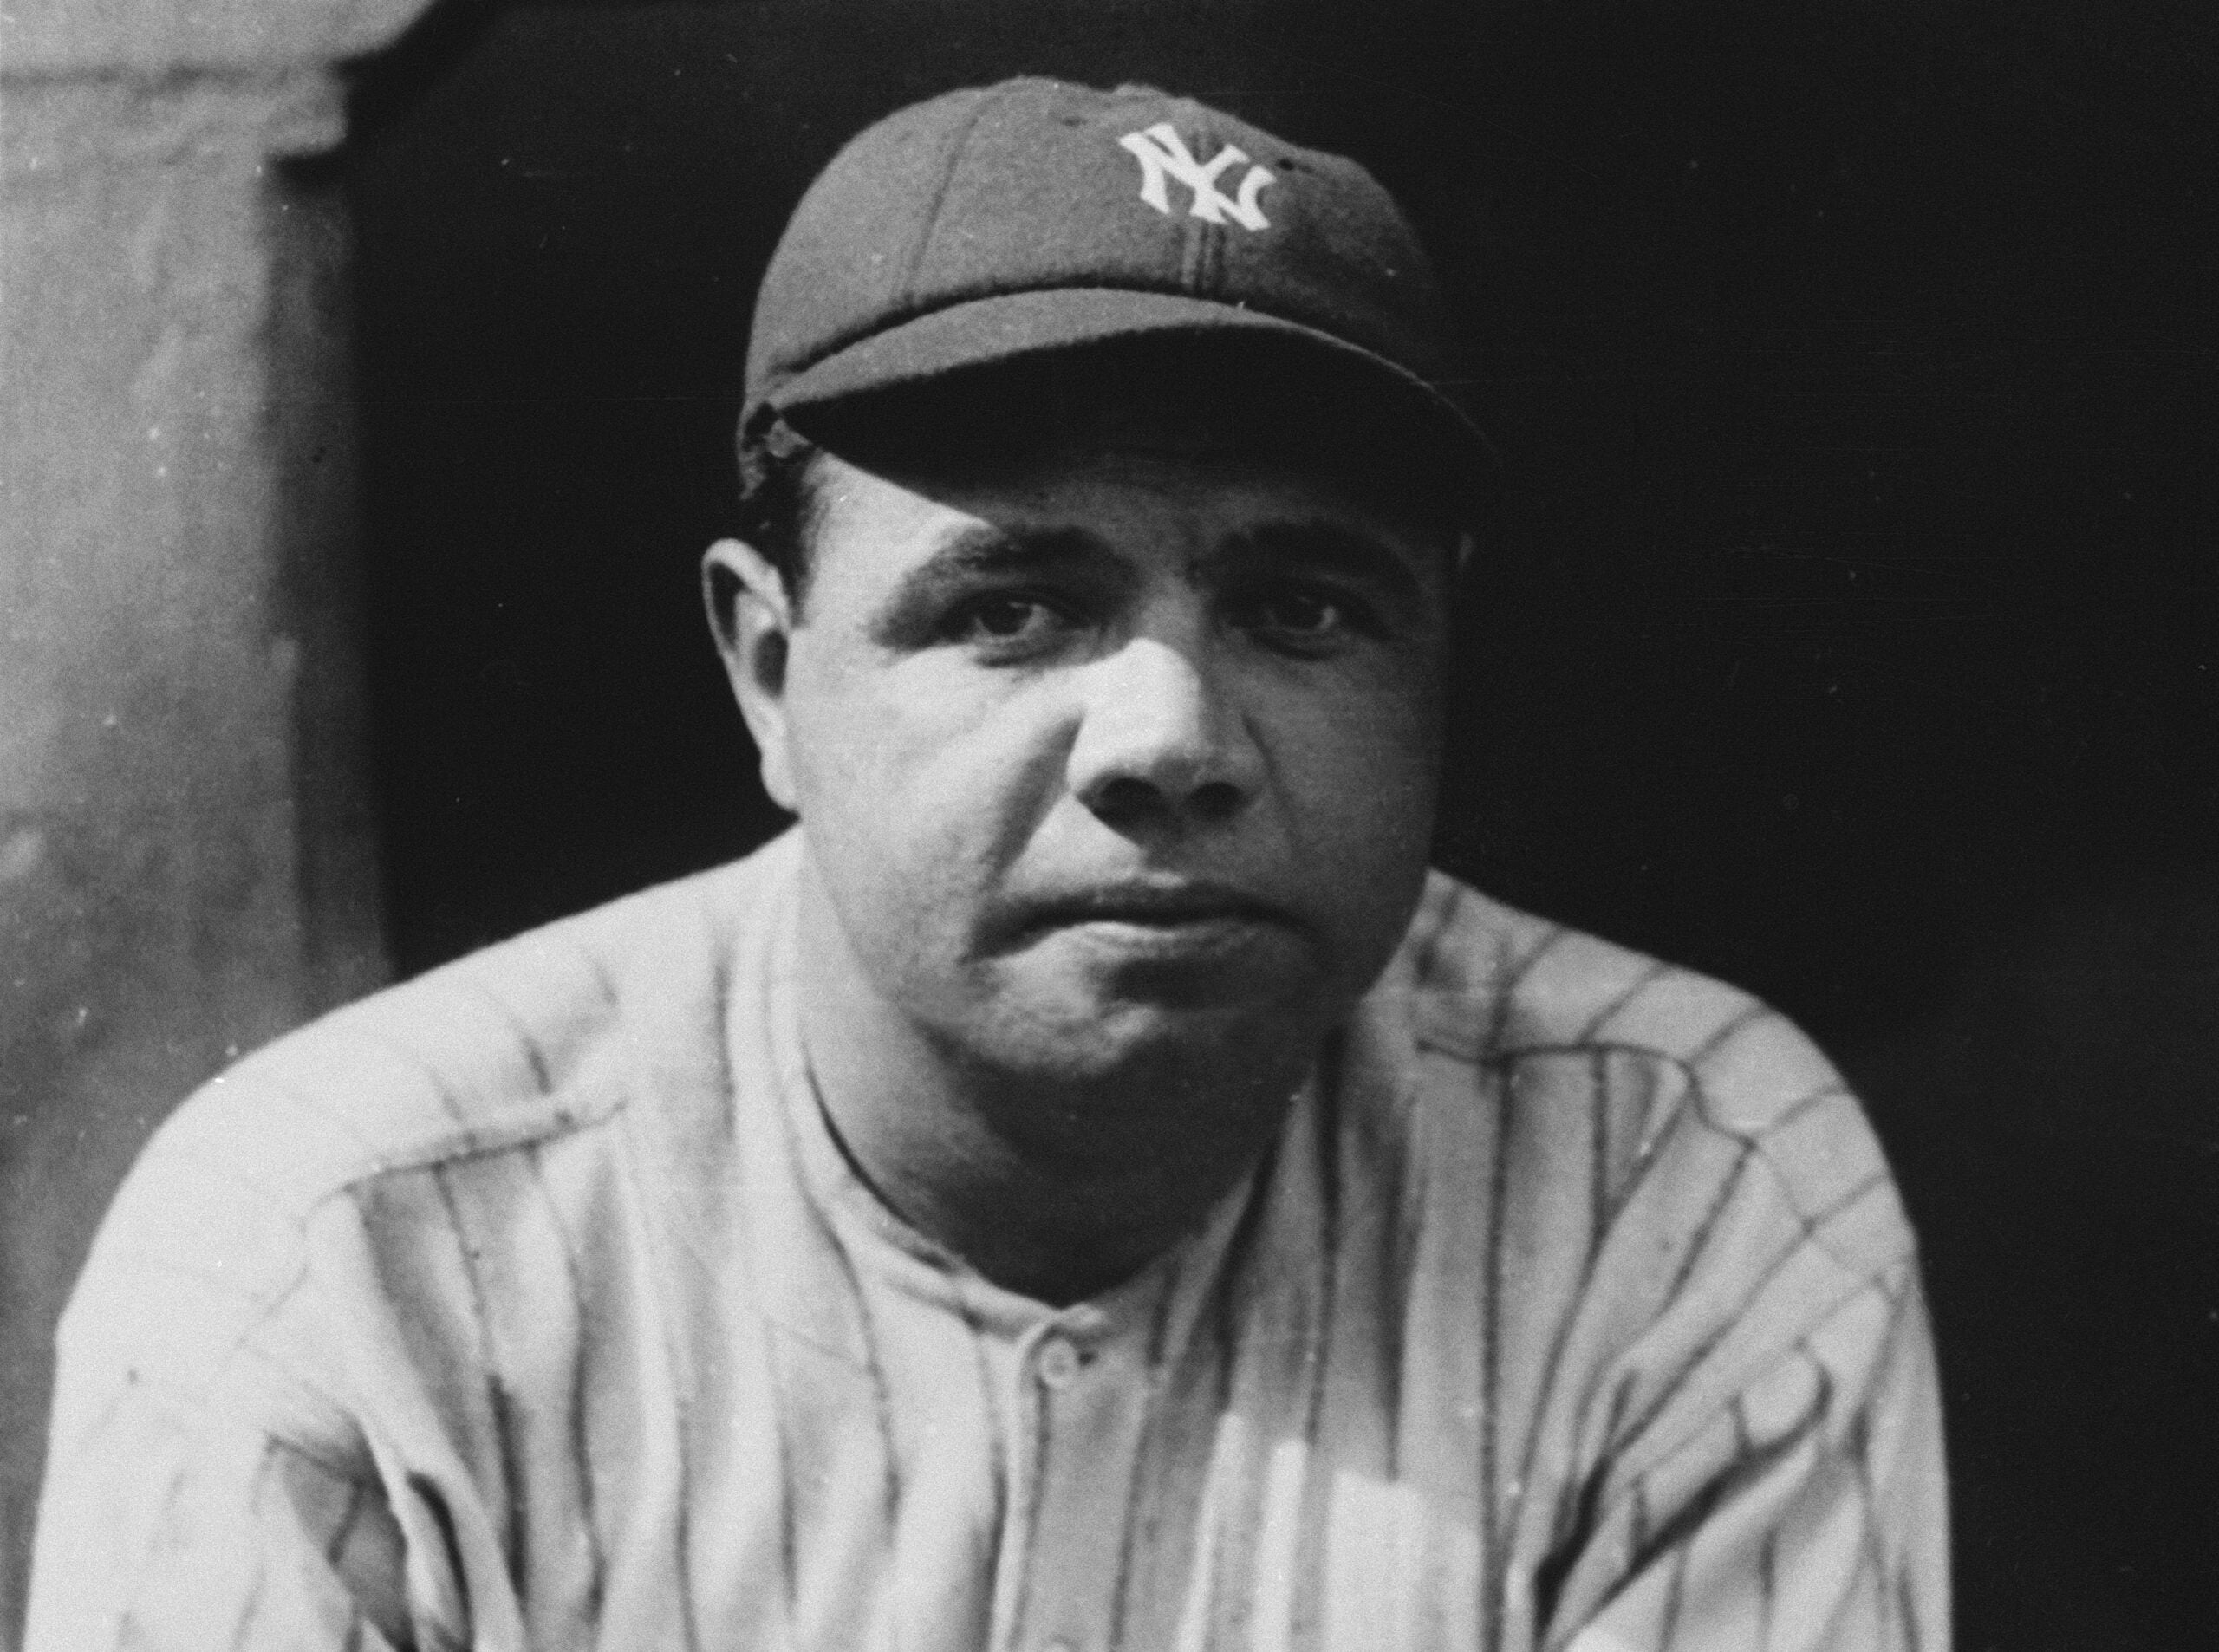 AP Images on X: Babe Ruth, wearing his famed number 3 uniform, bows as he  acknowledges the cheers of thousands of fans who saw the no. 3 retired  permanently by the Yankees #